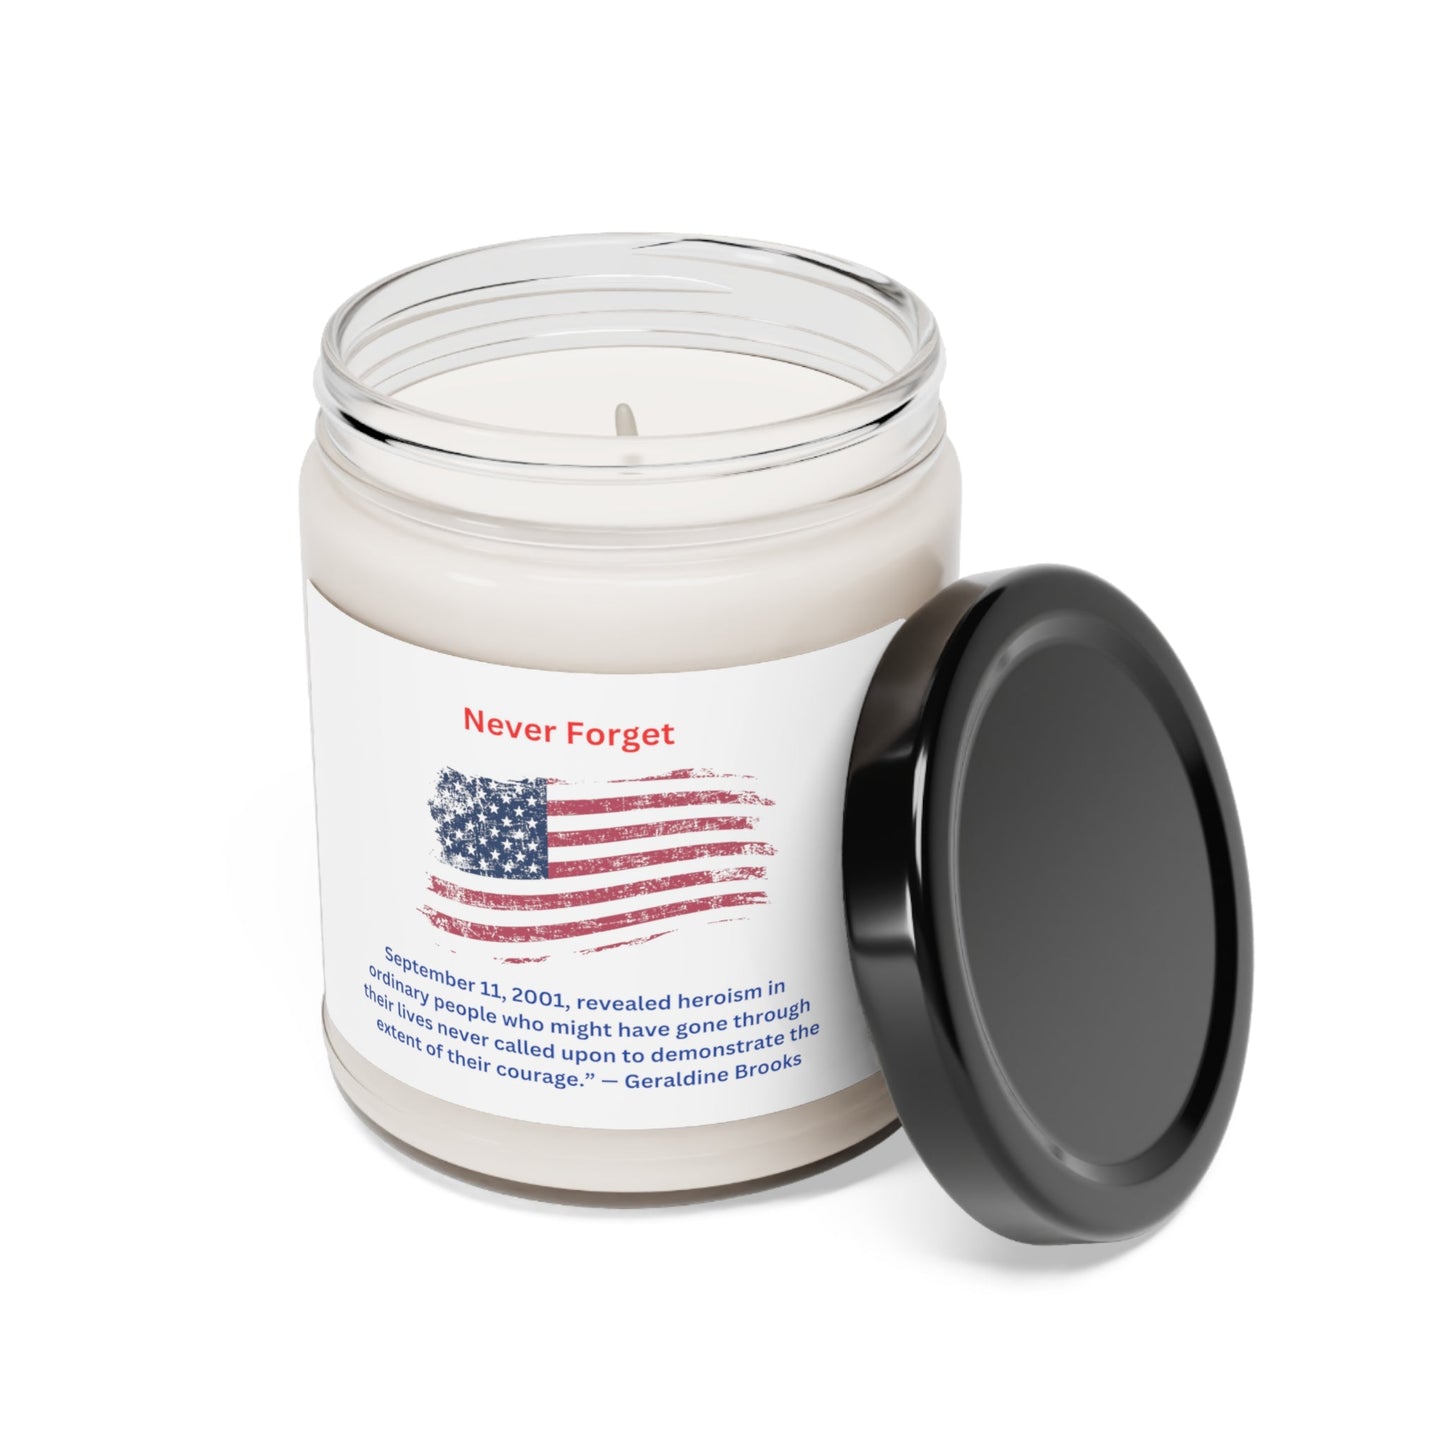 Get trendy with Apple Harvest Scented Soy Candle, 9oz  In remembrance of September 11 - Home Decor available at Good Gift Company. Grab yours for $16 today!